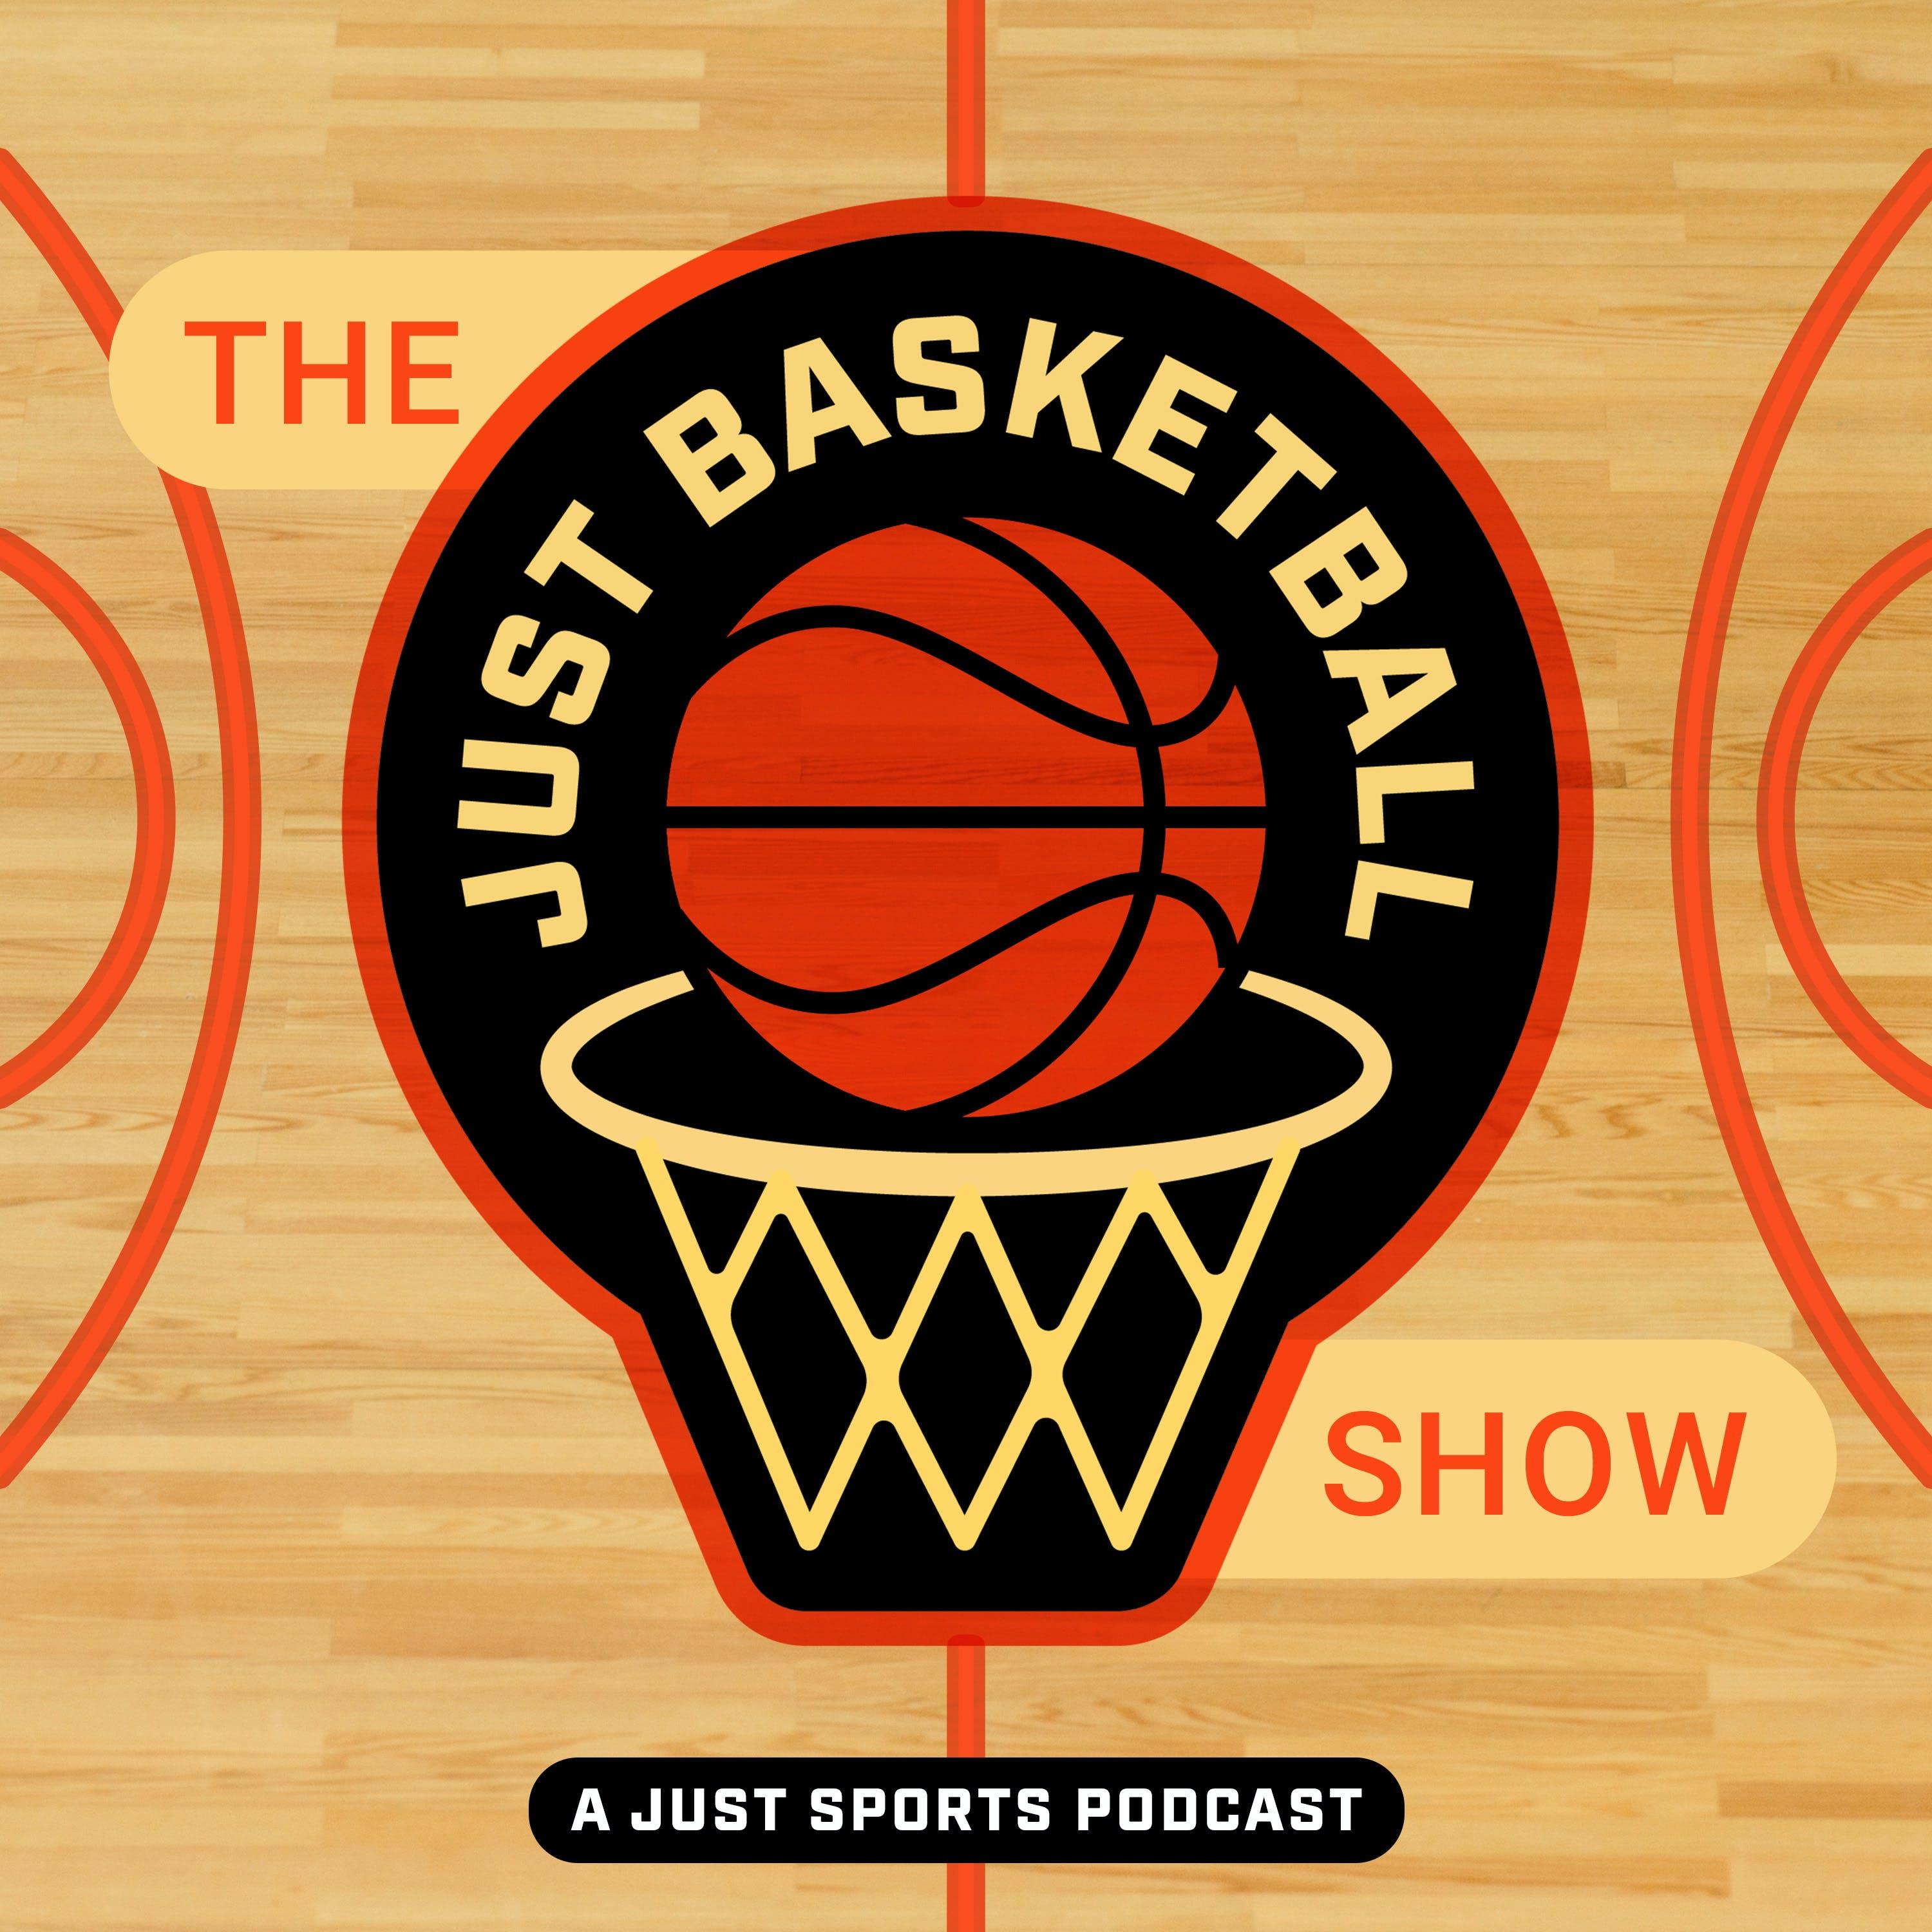 The Just Basketball Show